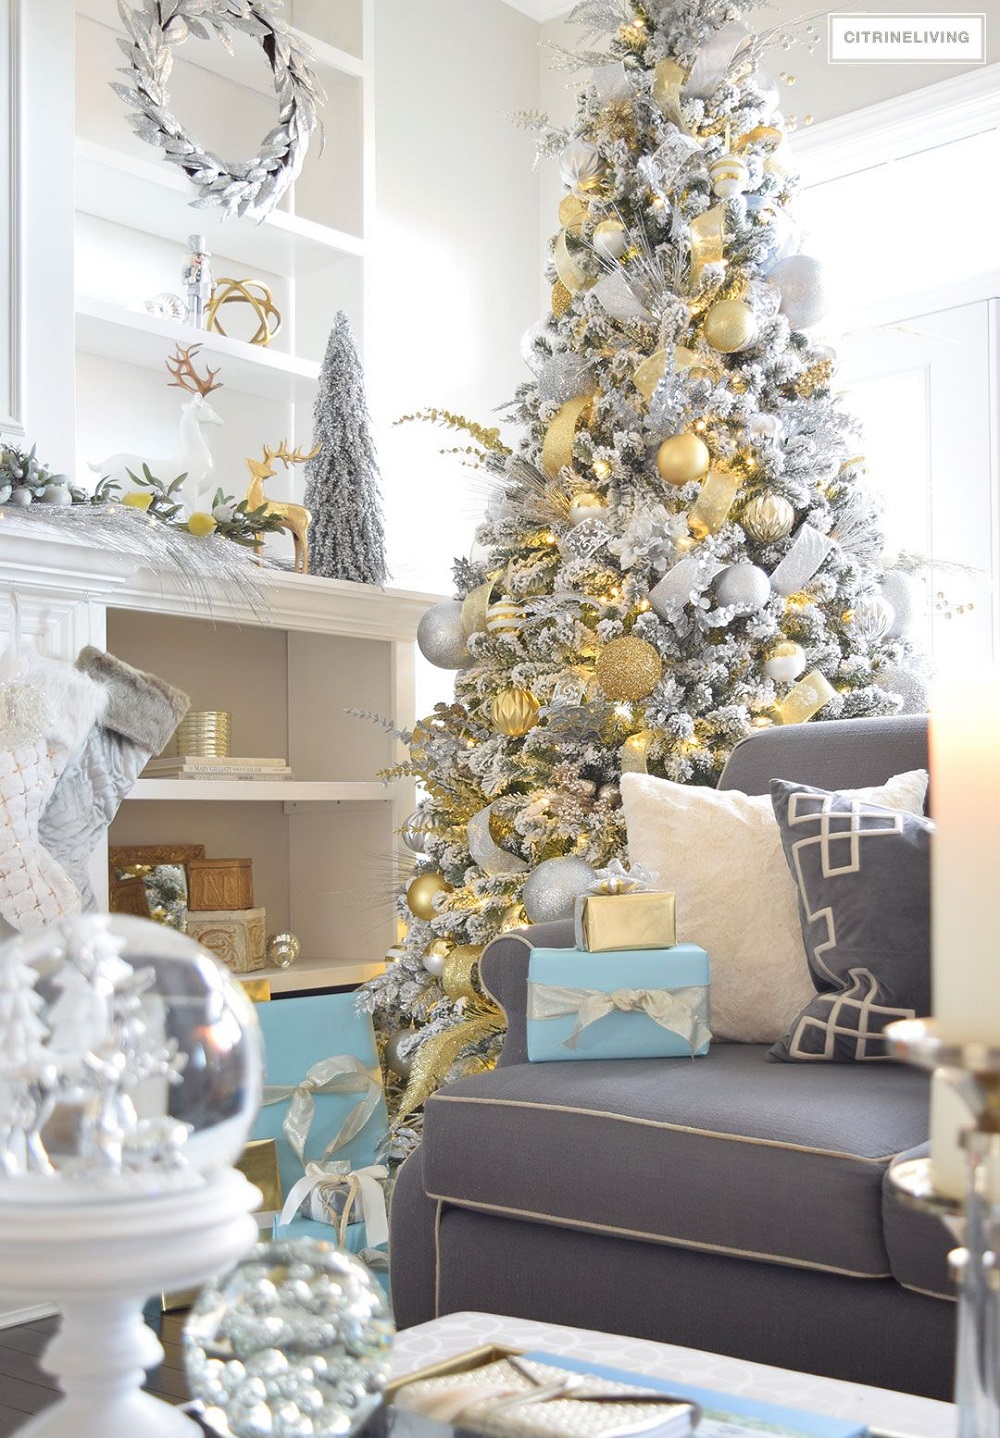 t3-149 Christmas living room decorations you must try in the holiday season